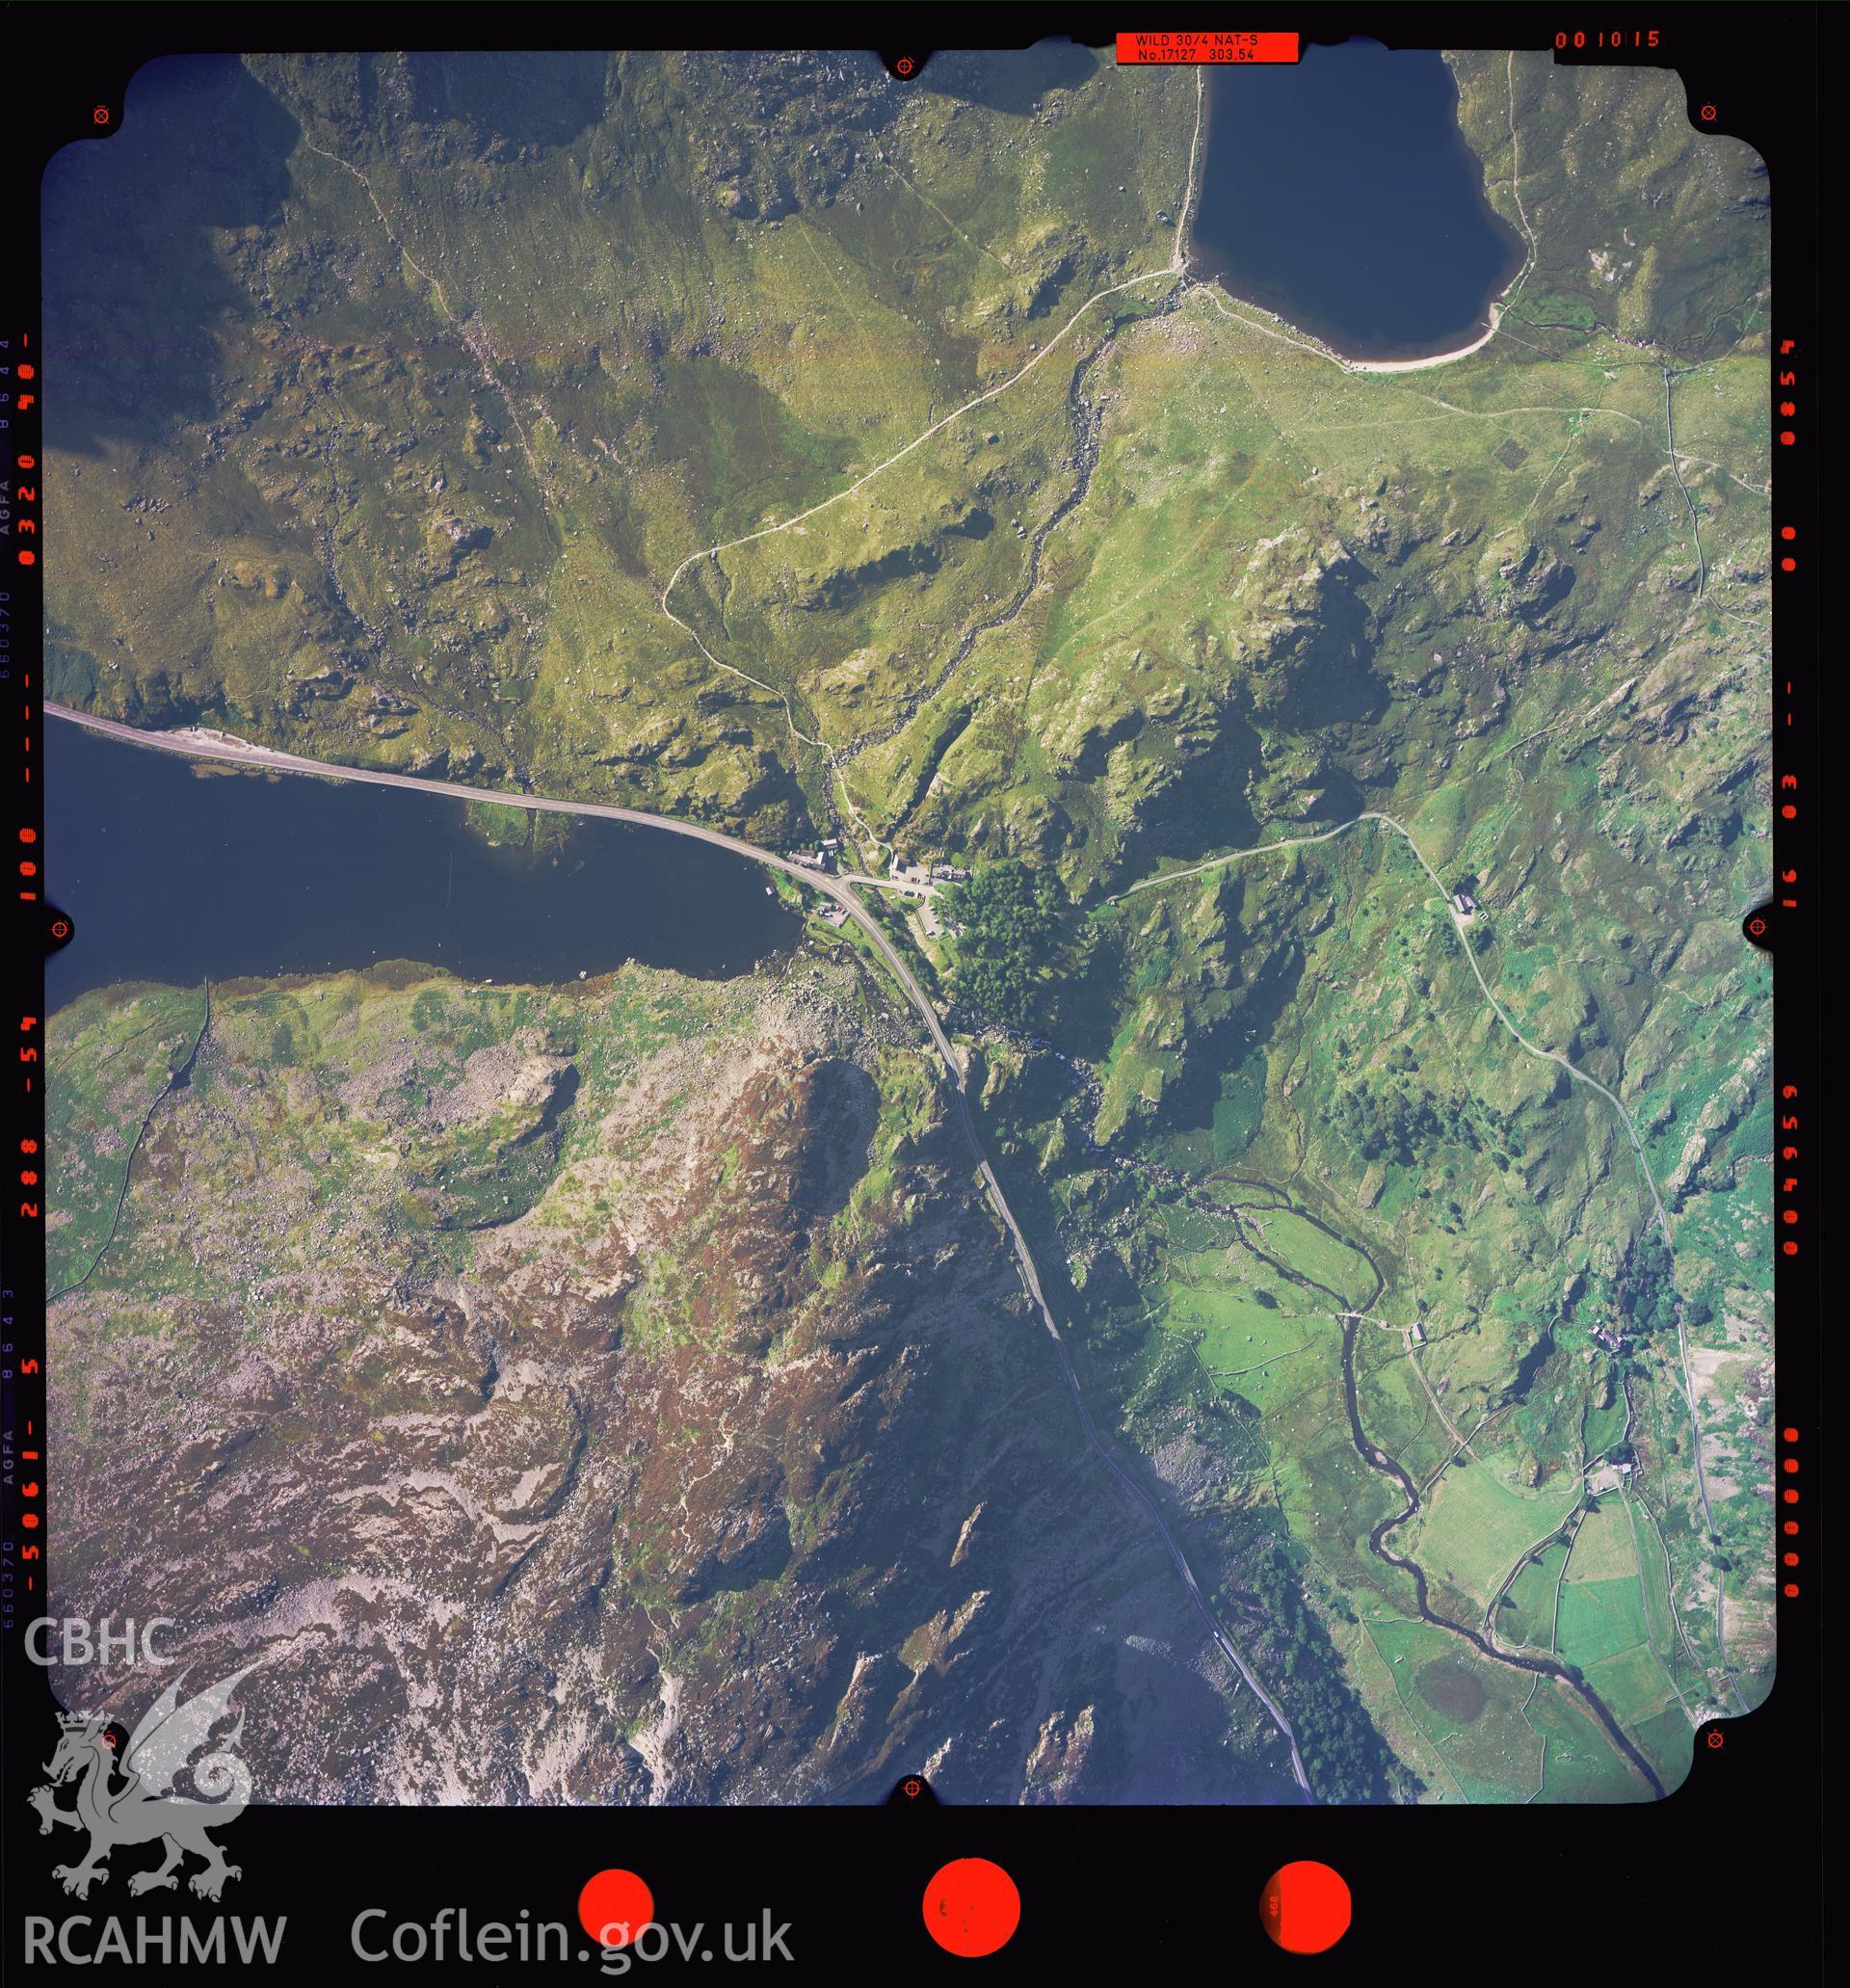 Digitized copy of a colour aerial photograph showing Cwm Idwal, taken by Ordnance Survey, 2002.